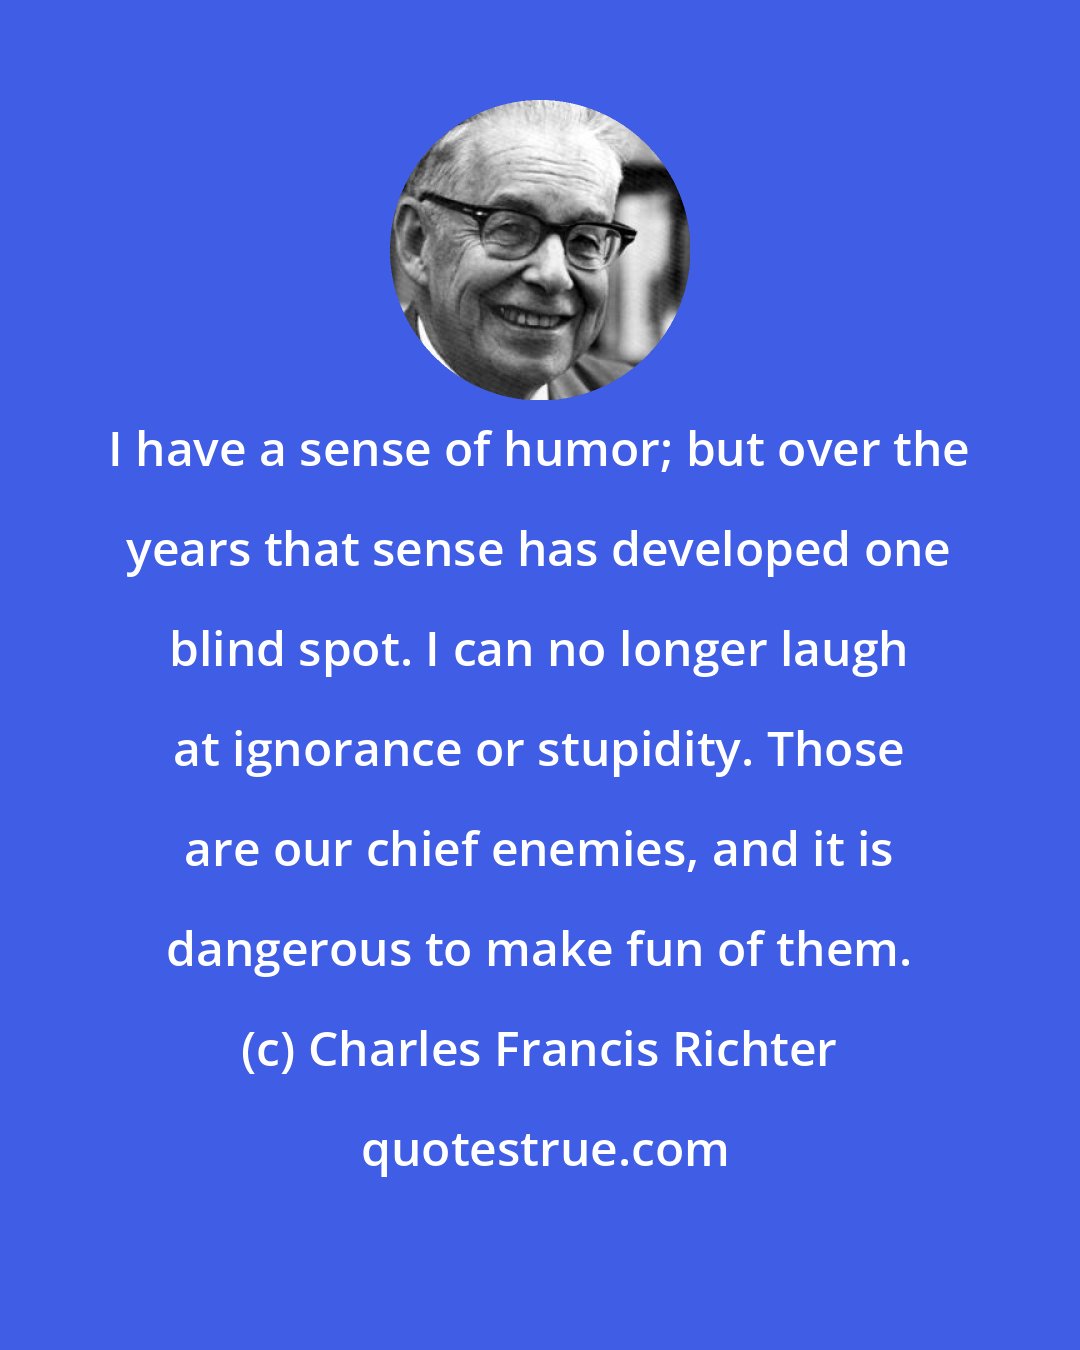 Charles Francis Richter: I have a sense of humor; but over the years that sense has developed one blind spot. I can no longer laugh at ignorance or stupidity. Those are our chief enemies, and it is dangerous to make fun of them.